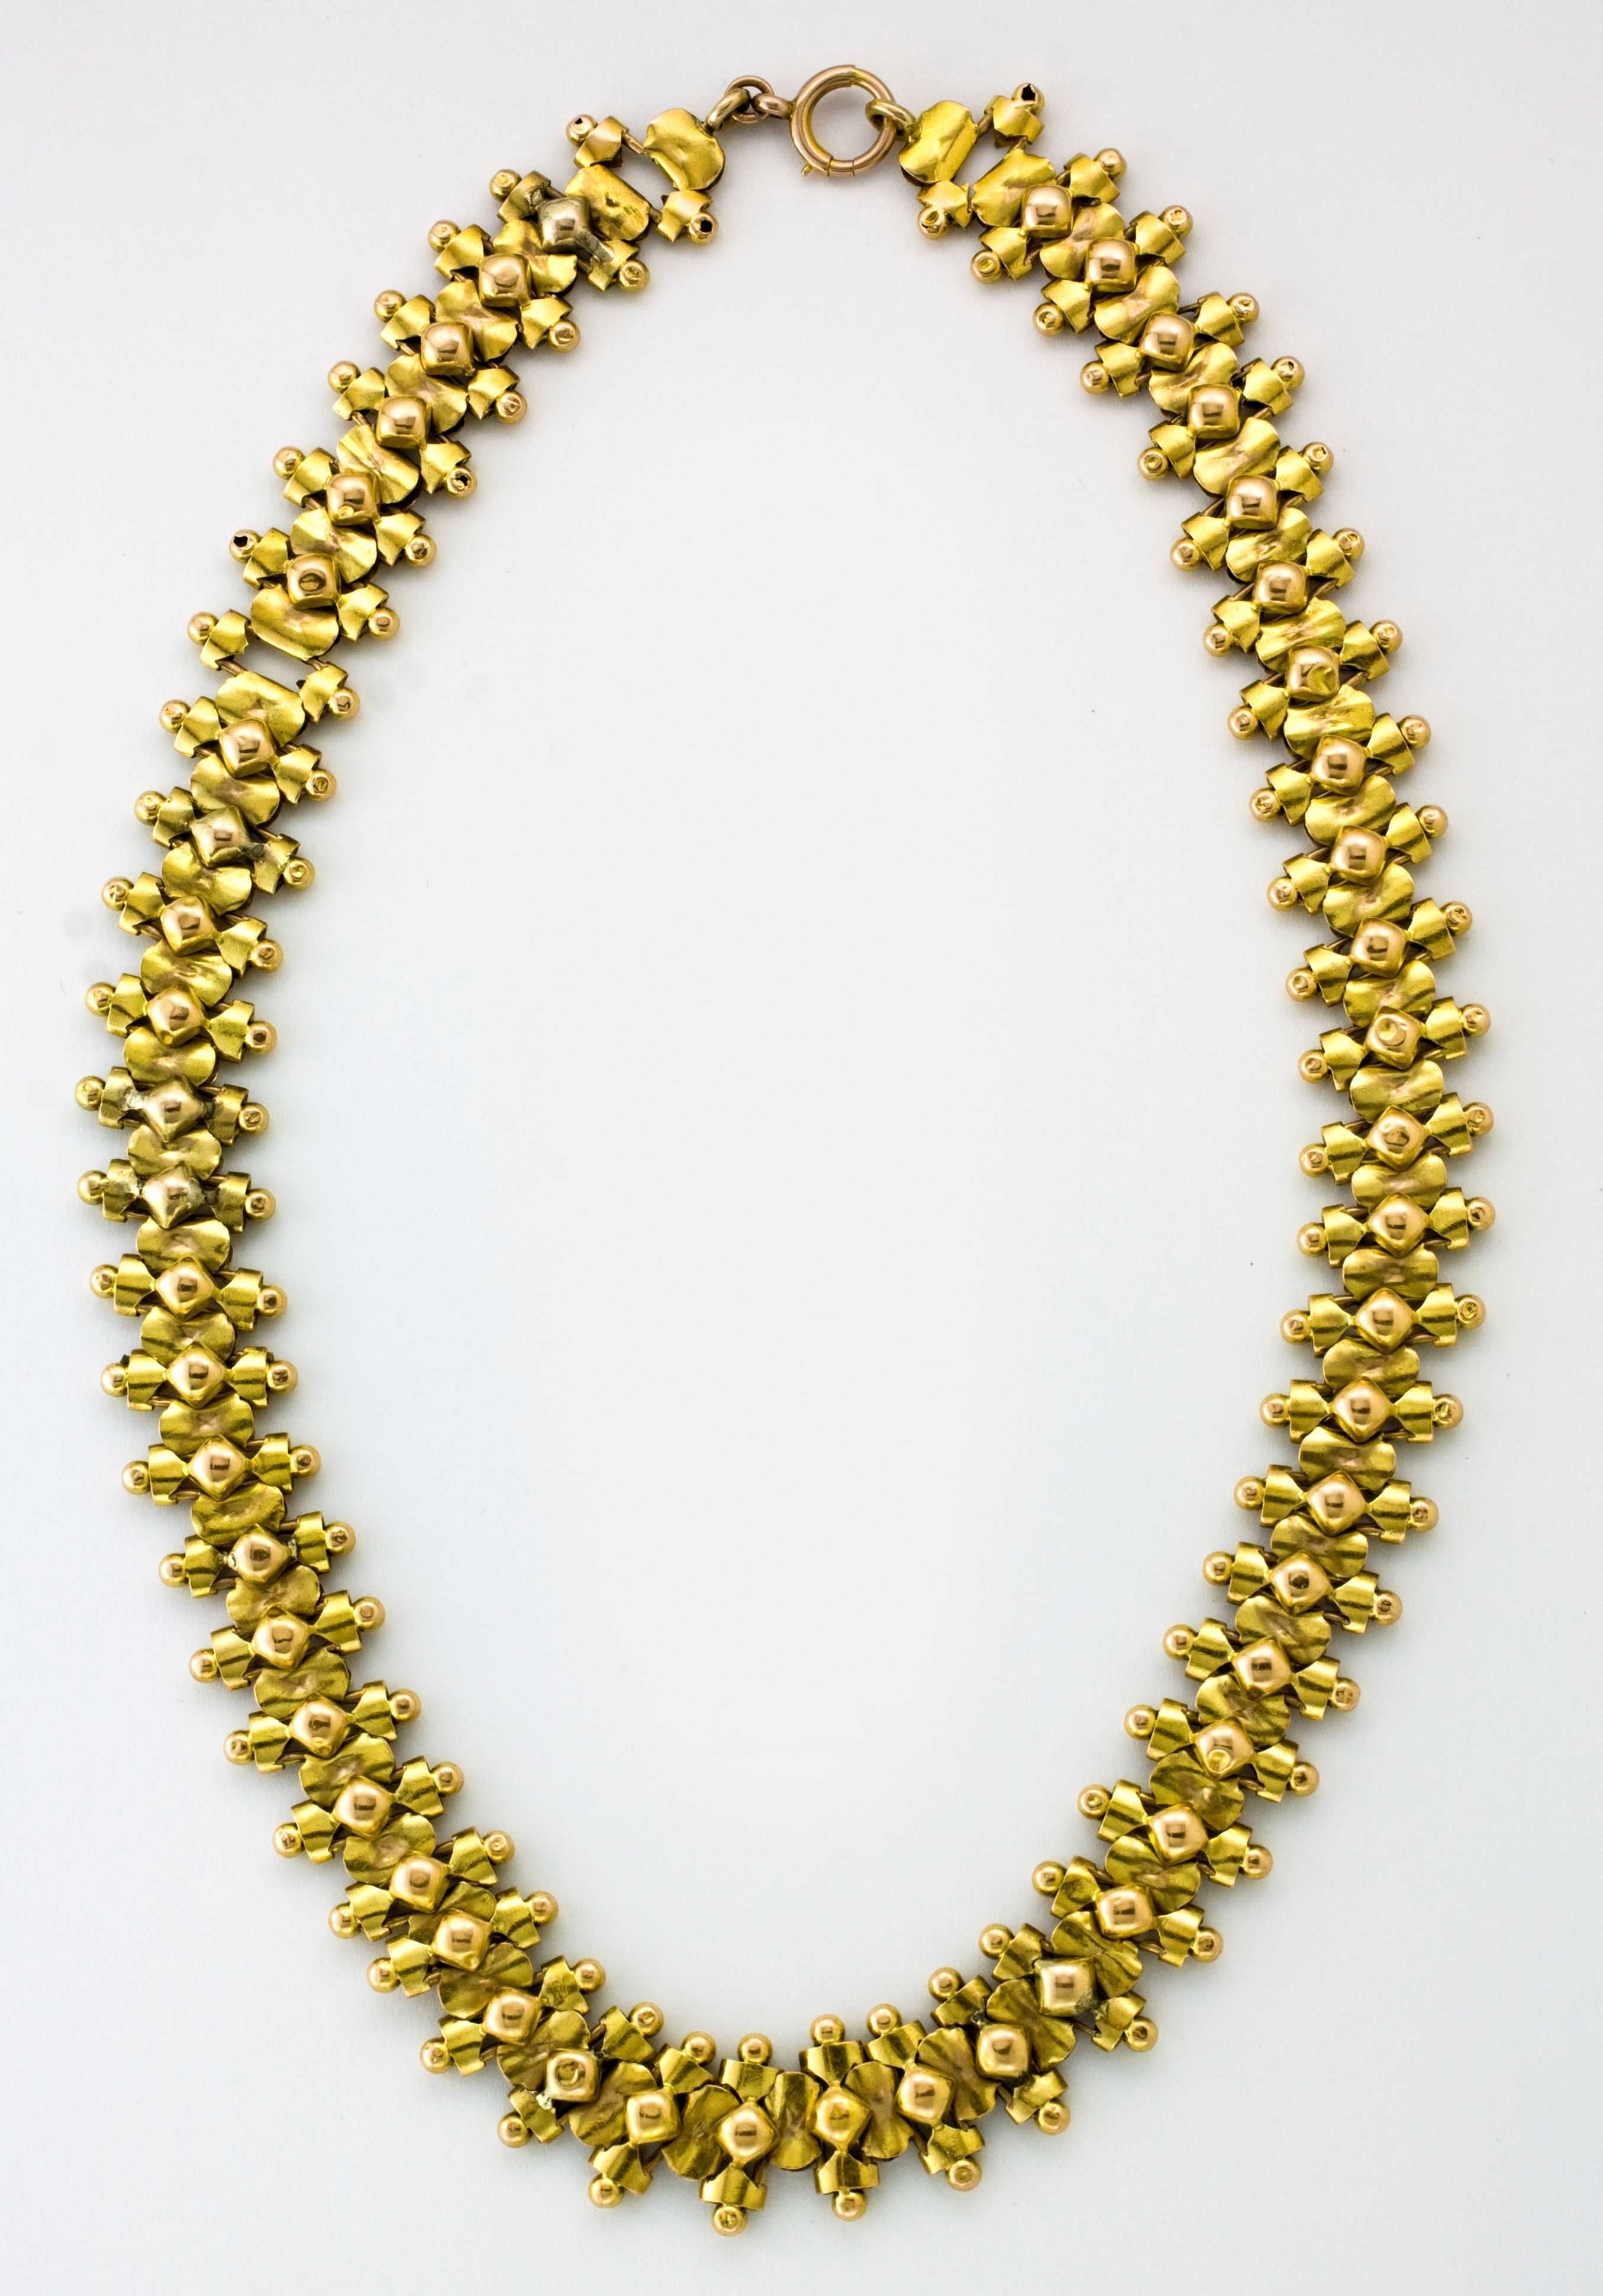 Victorian gold necklace, late 19th century | Strauss & Co